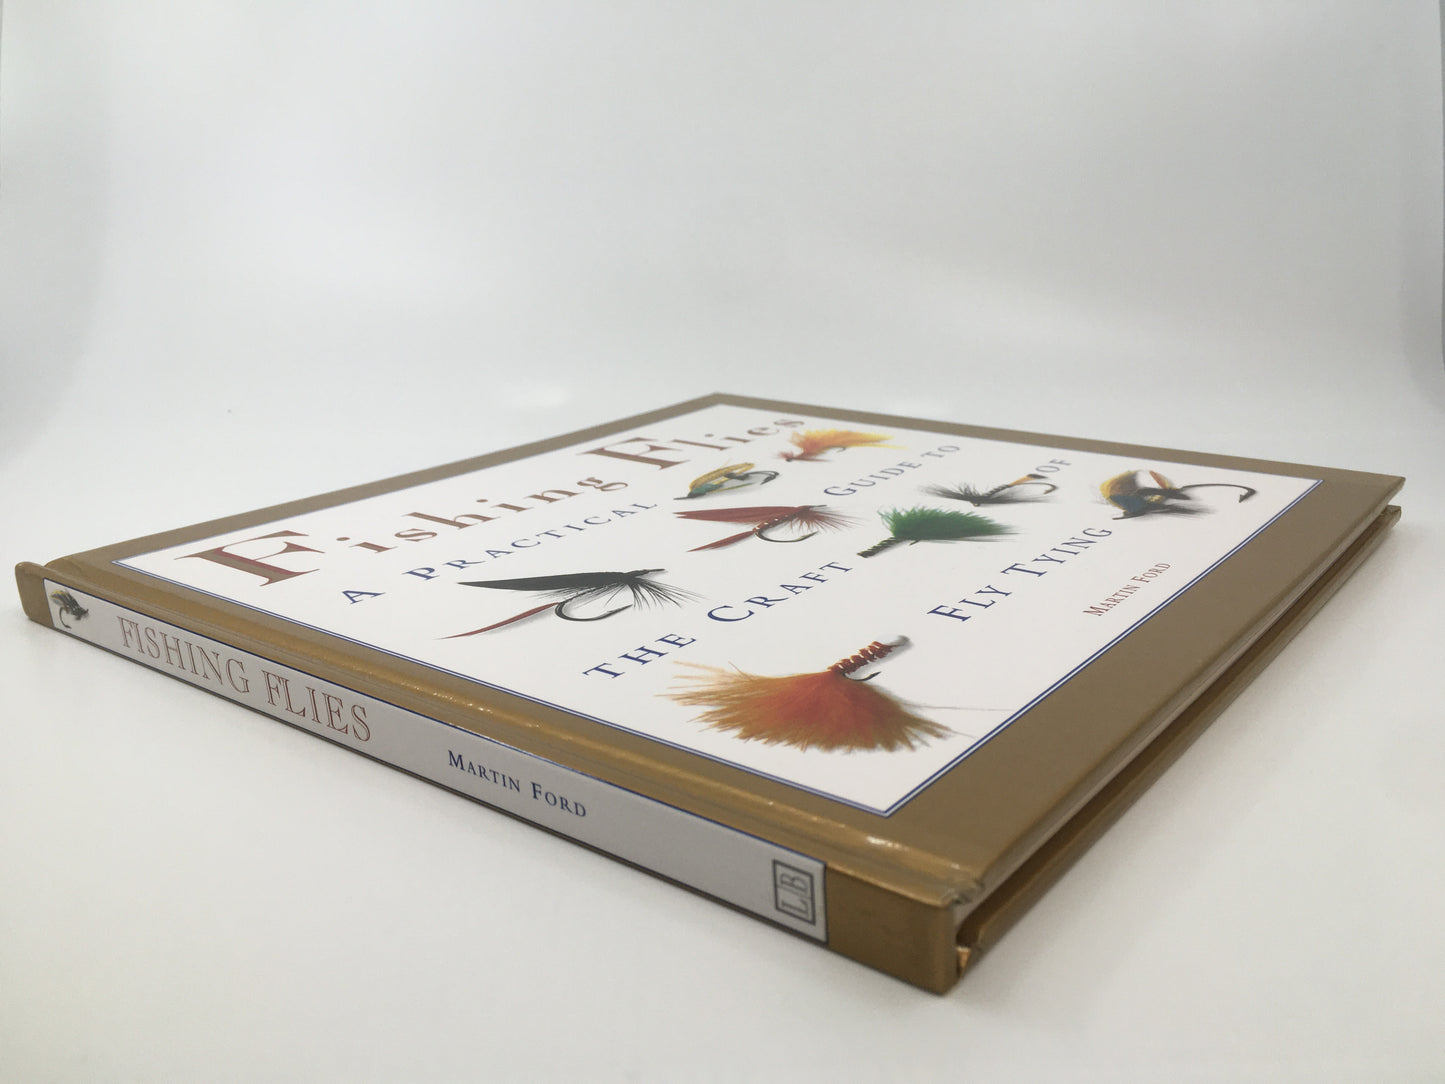 Fishing Flies: A Practical Guide to the Art of Fly Tying